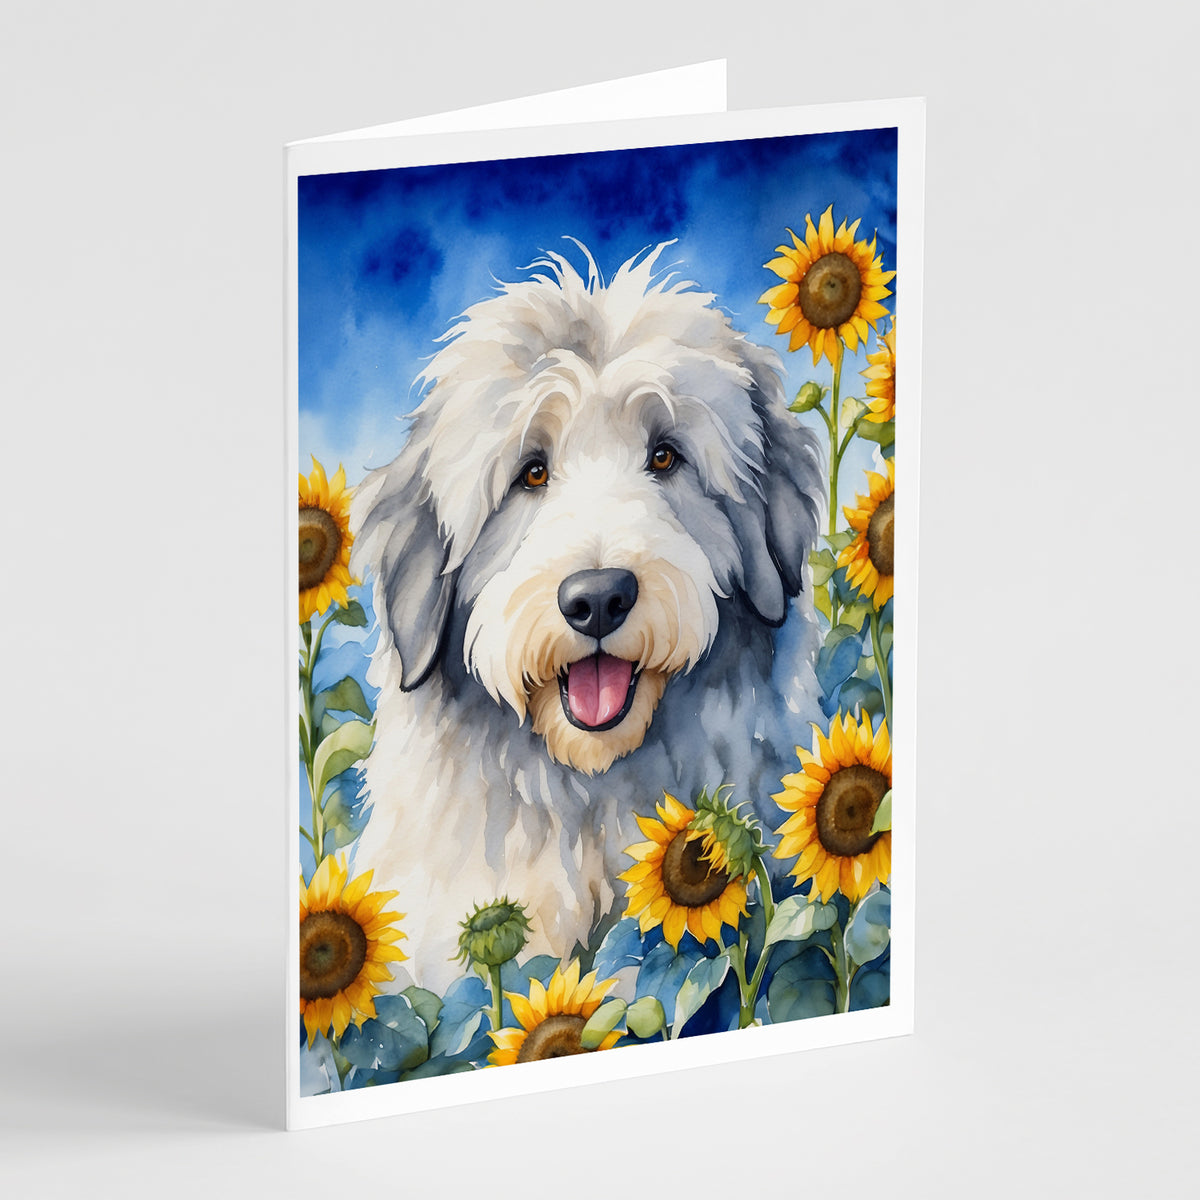 Buy this Old English Sheepdog in Sunflowers Greeting Cards Pack of 8